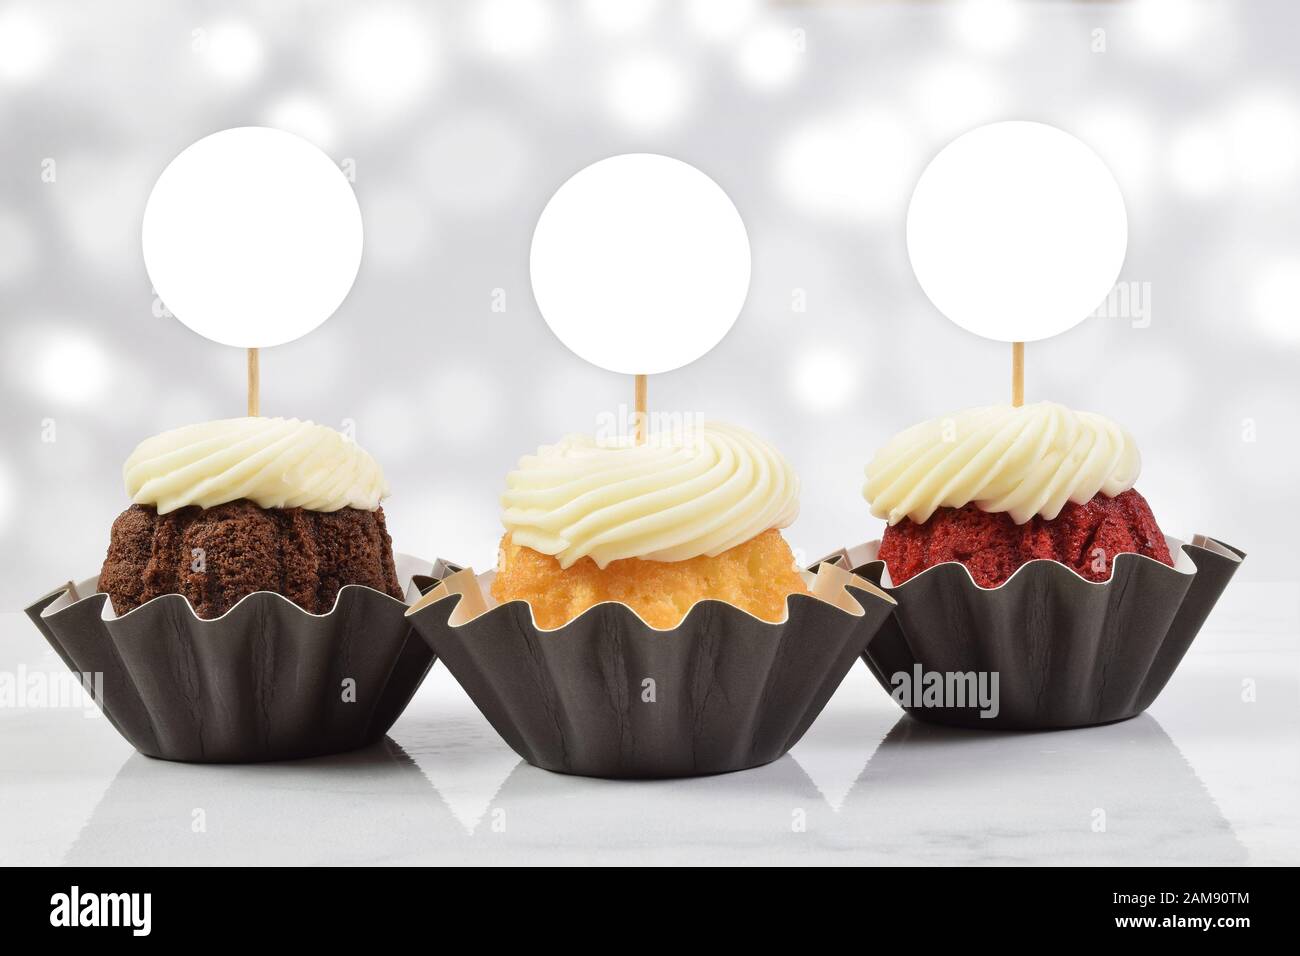 Download A Tempting Cupcake Topper Mockup Featuring Three Delicious Gourmet Cupcakes On A White Marble Background Add Your Own Design To The Cupcake Toppers Stock Photo Alamy